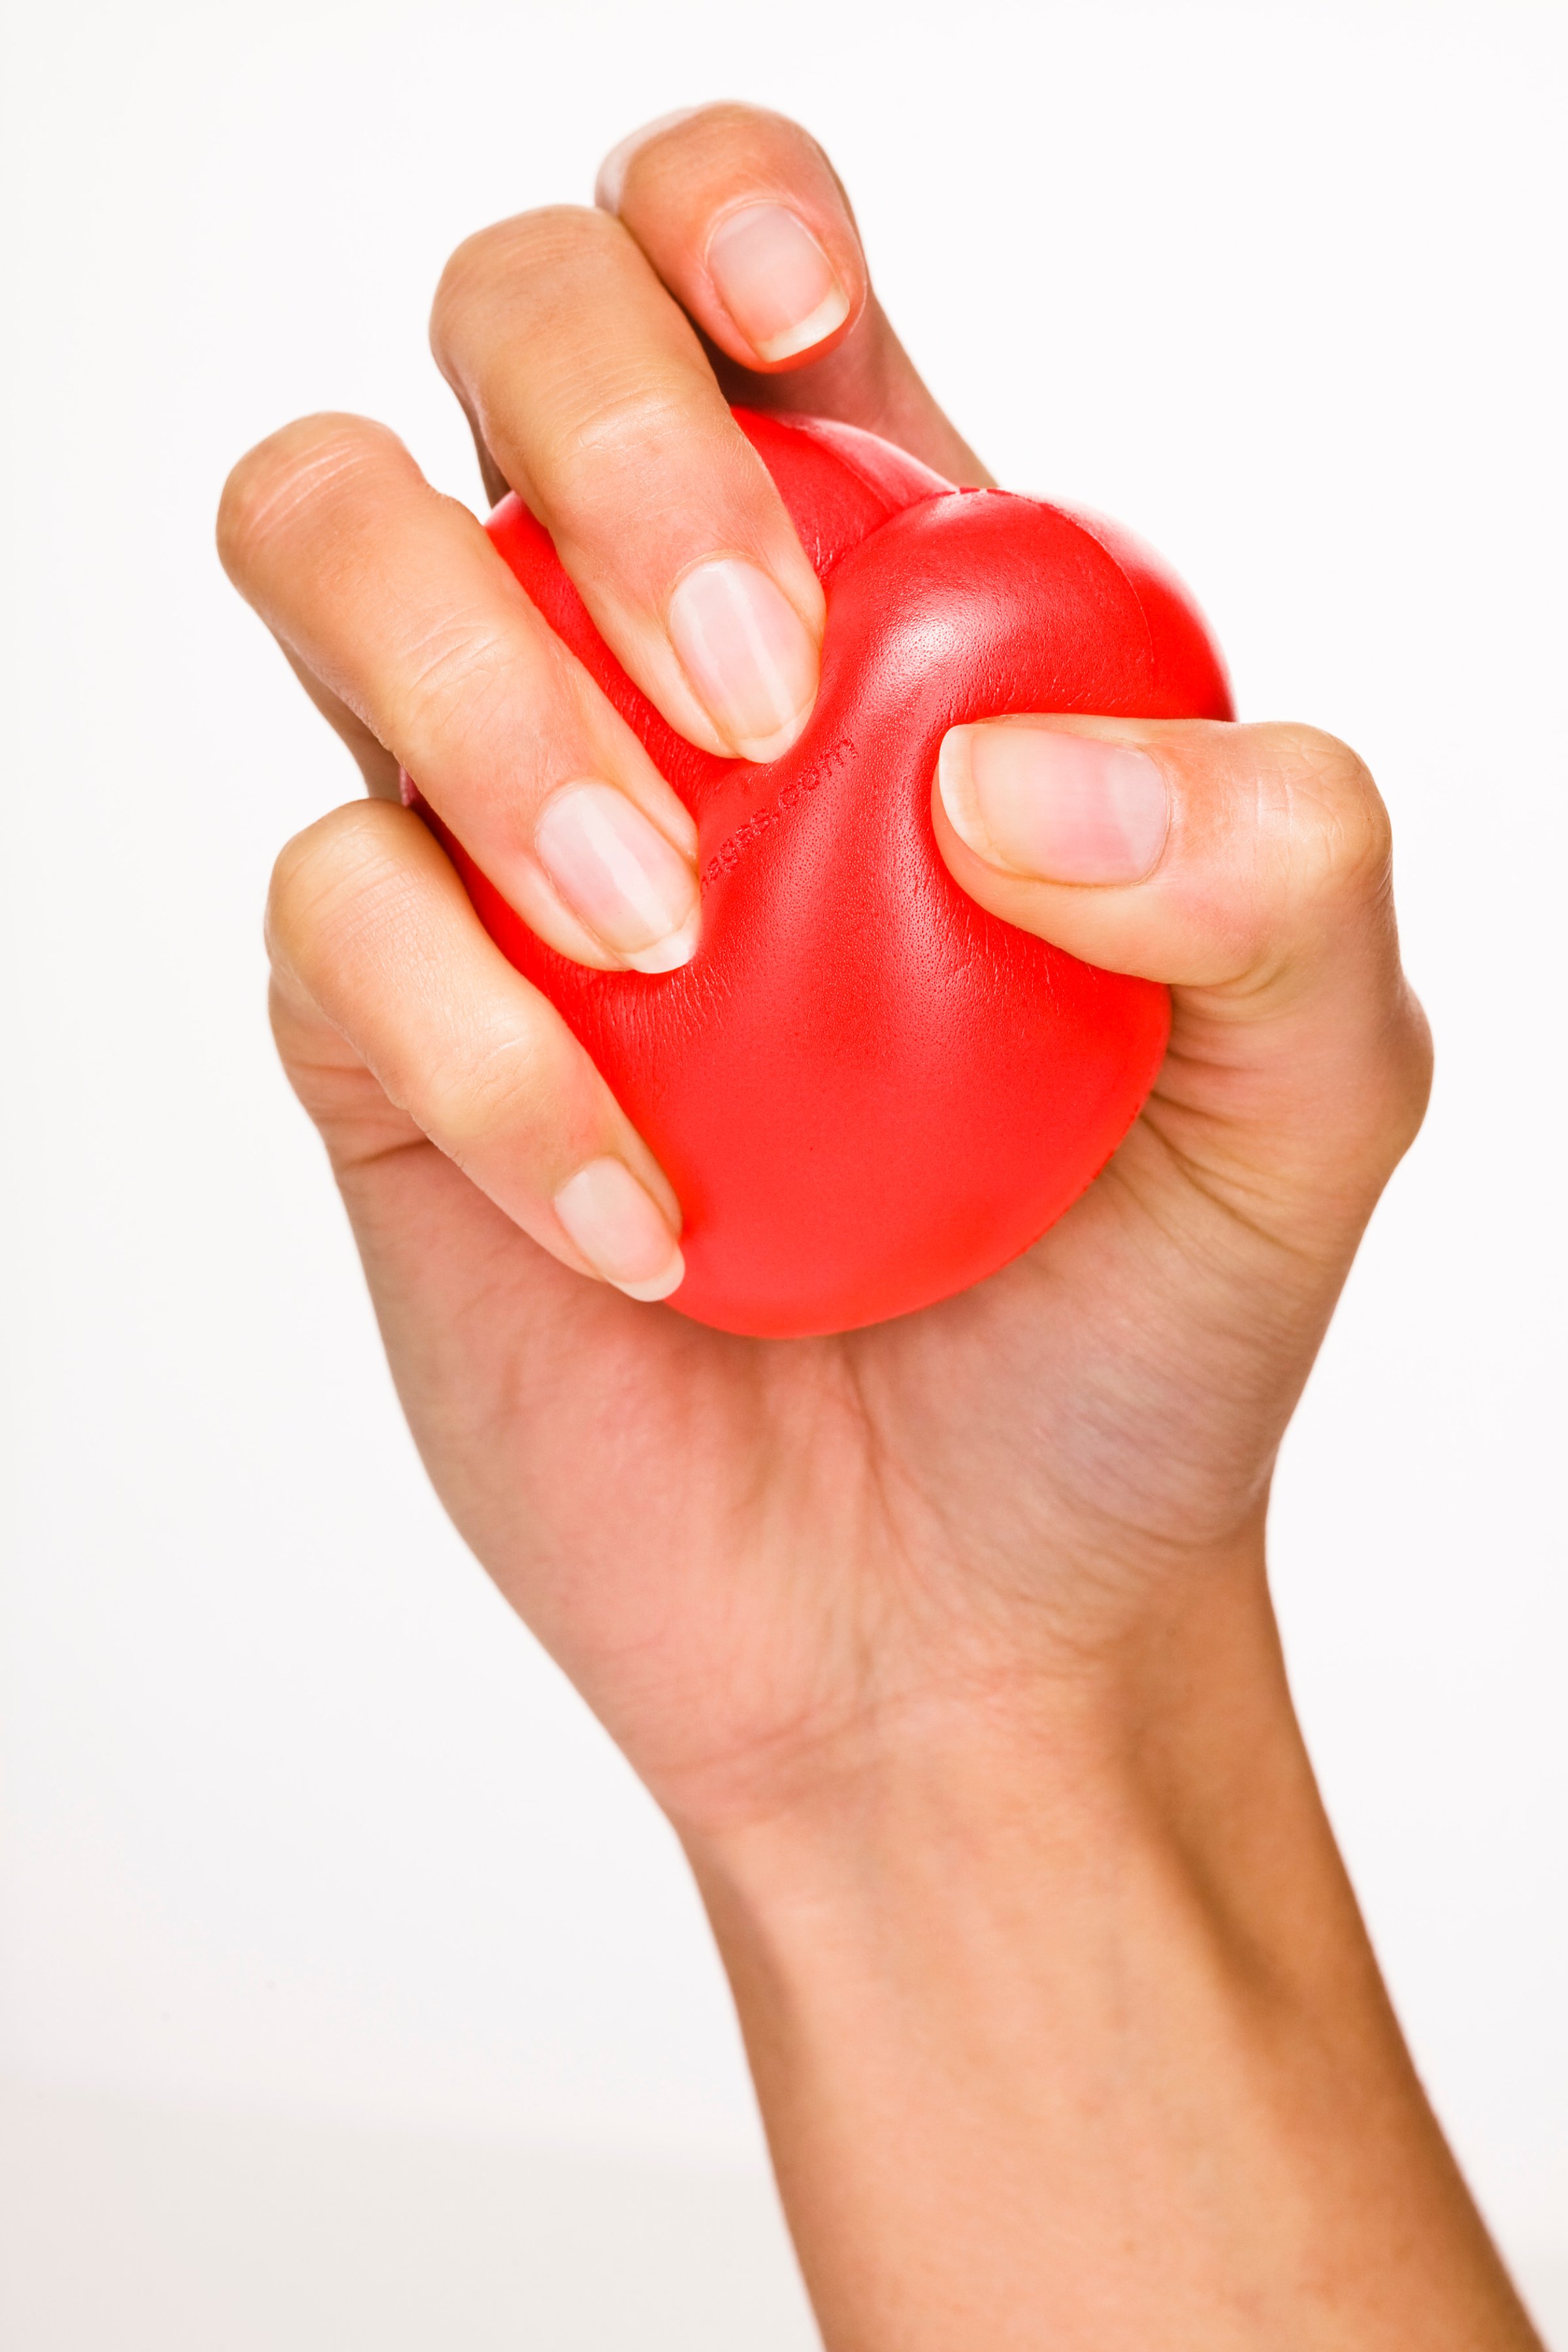 Woman's hand holding red plastic heart